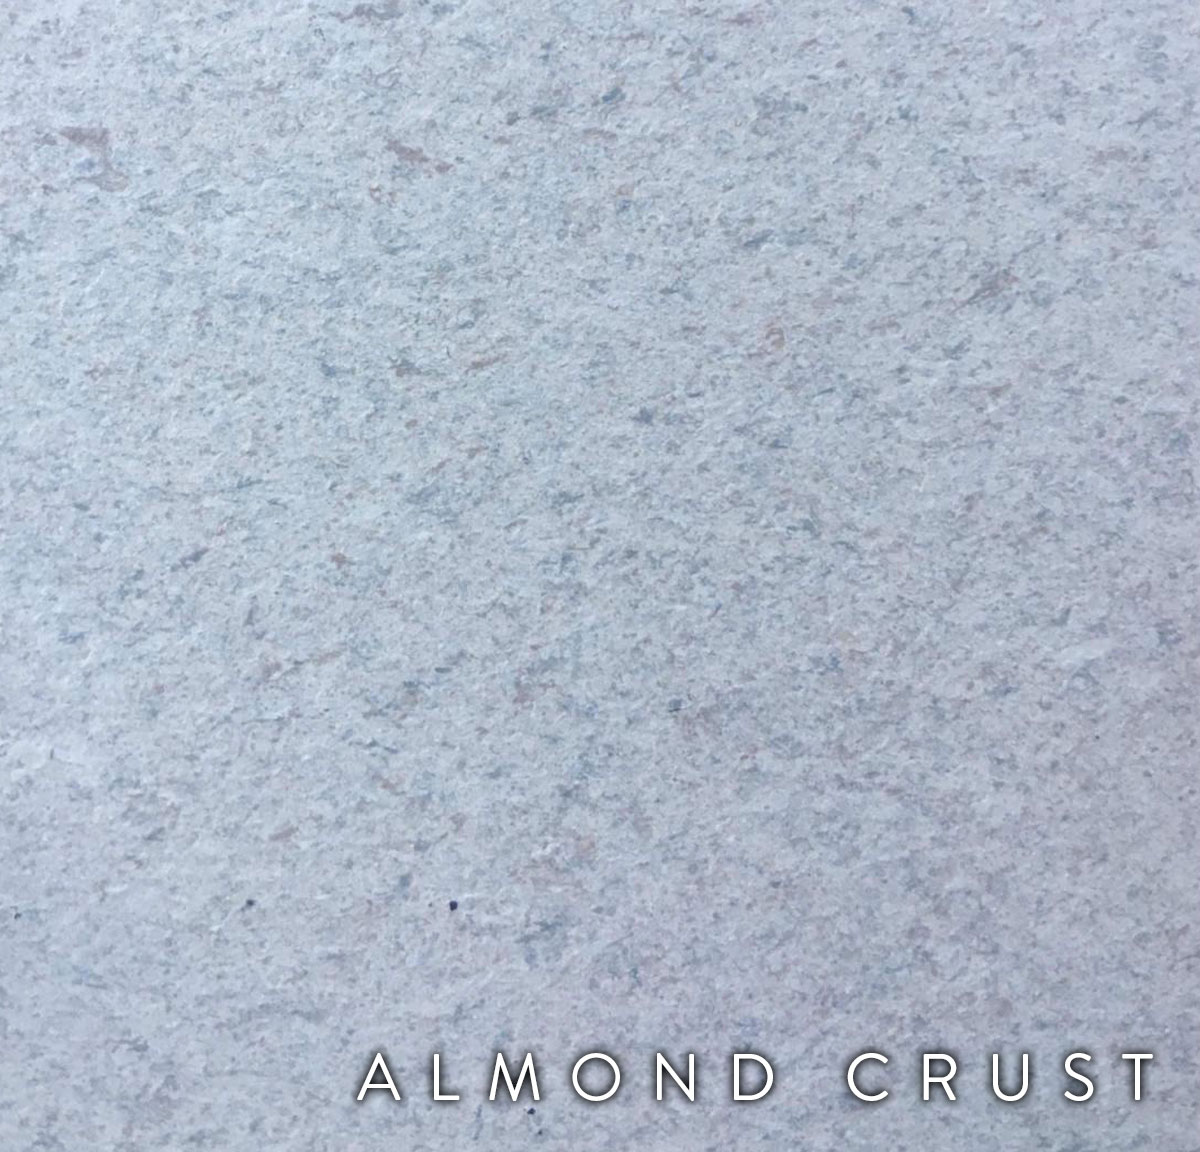 Almond Crust Countertop Color by Kitchen & Bath Restoration in Houston Texas